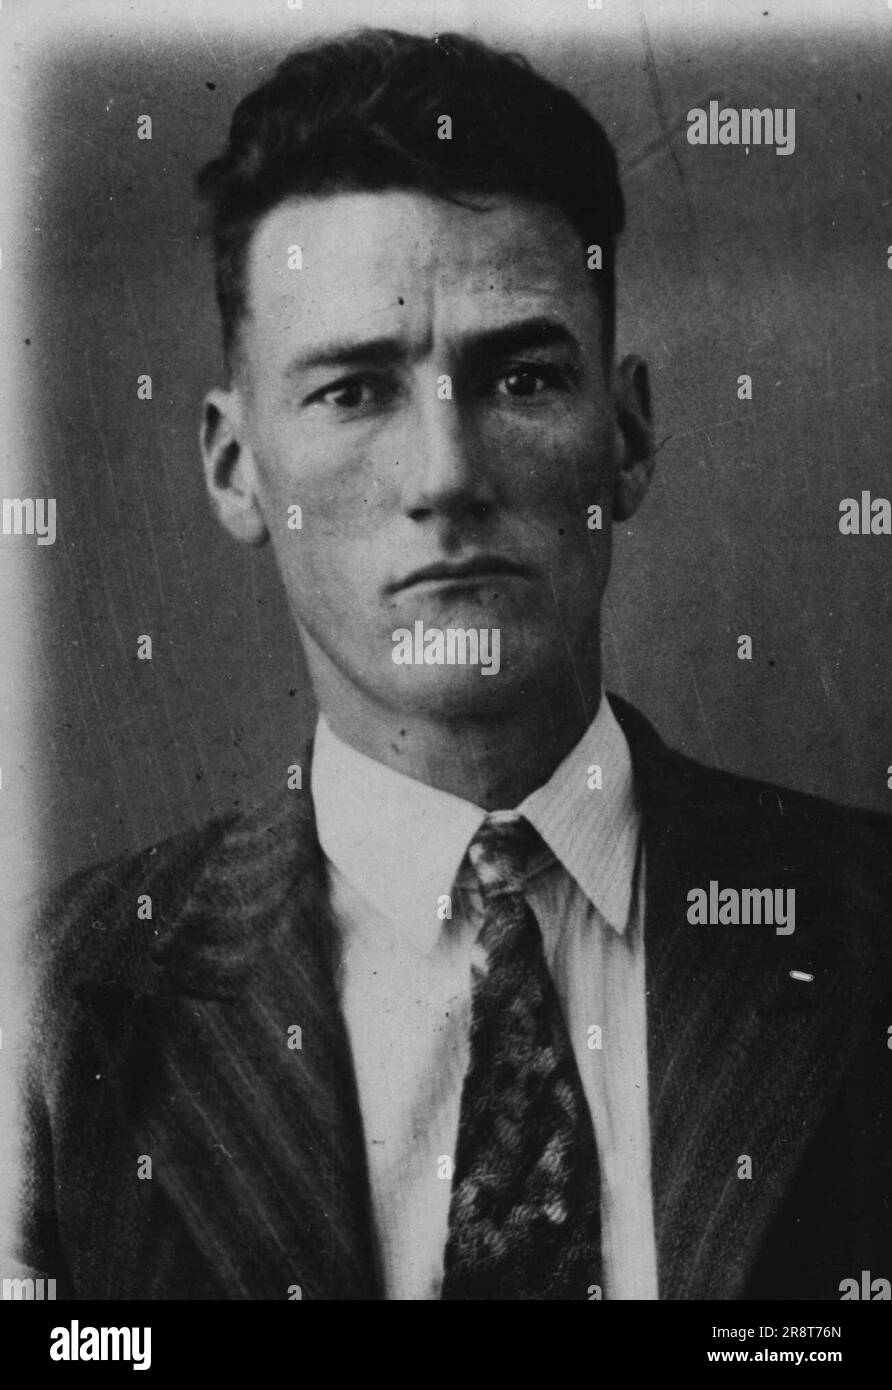 Arthur Ernest Halliday, native of New South Wales, 35. 5ft. 71/2in., slight build, brown hair, hazel eyes, fair complexion, scar inside left shin. Left little finger missing to second joint. Is wearing long trousers, grey or dark, a blue striped shirt, and an old felt hat. He is a notorious house-breaker, and in 1939 was sentenced to five years' gaol for a series of robberies. In January, 1940, he escaped from the Brisbane Prison at the same spot, and by the same means as he did yesterday, and was free for two weeks. He received mine months' gaol for having escaped, and sentences on steal… Stock Photo